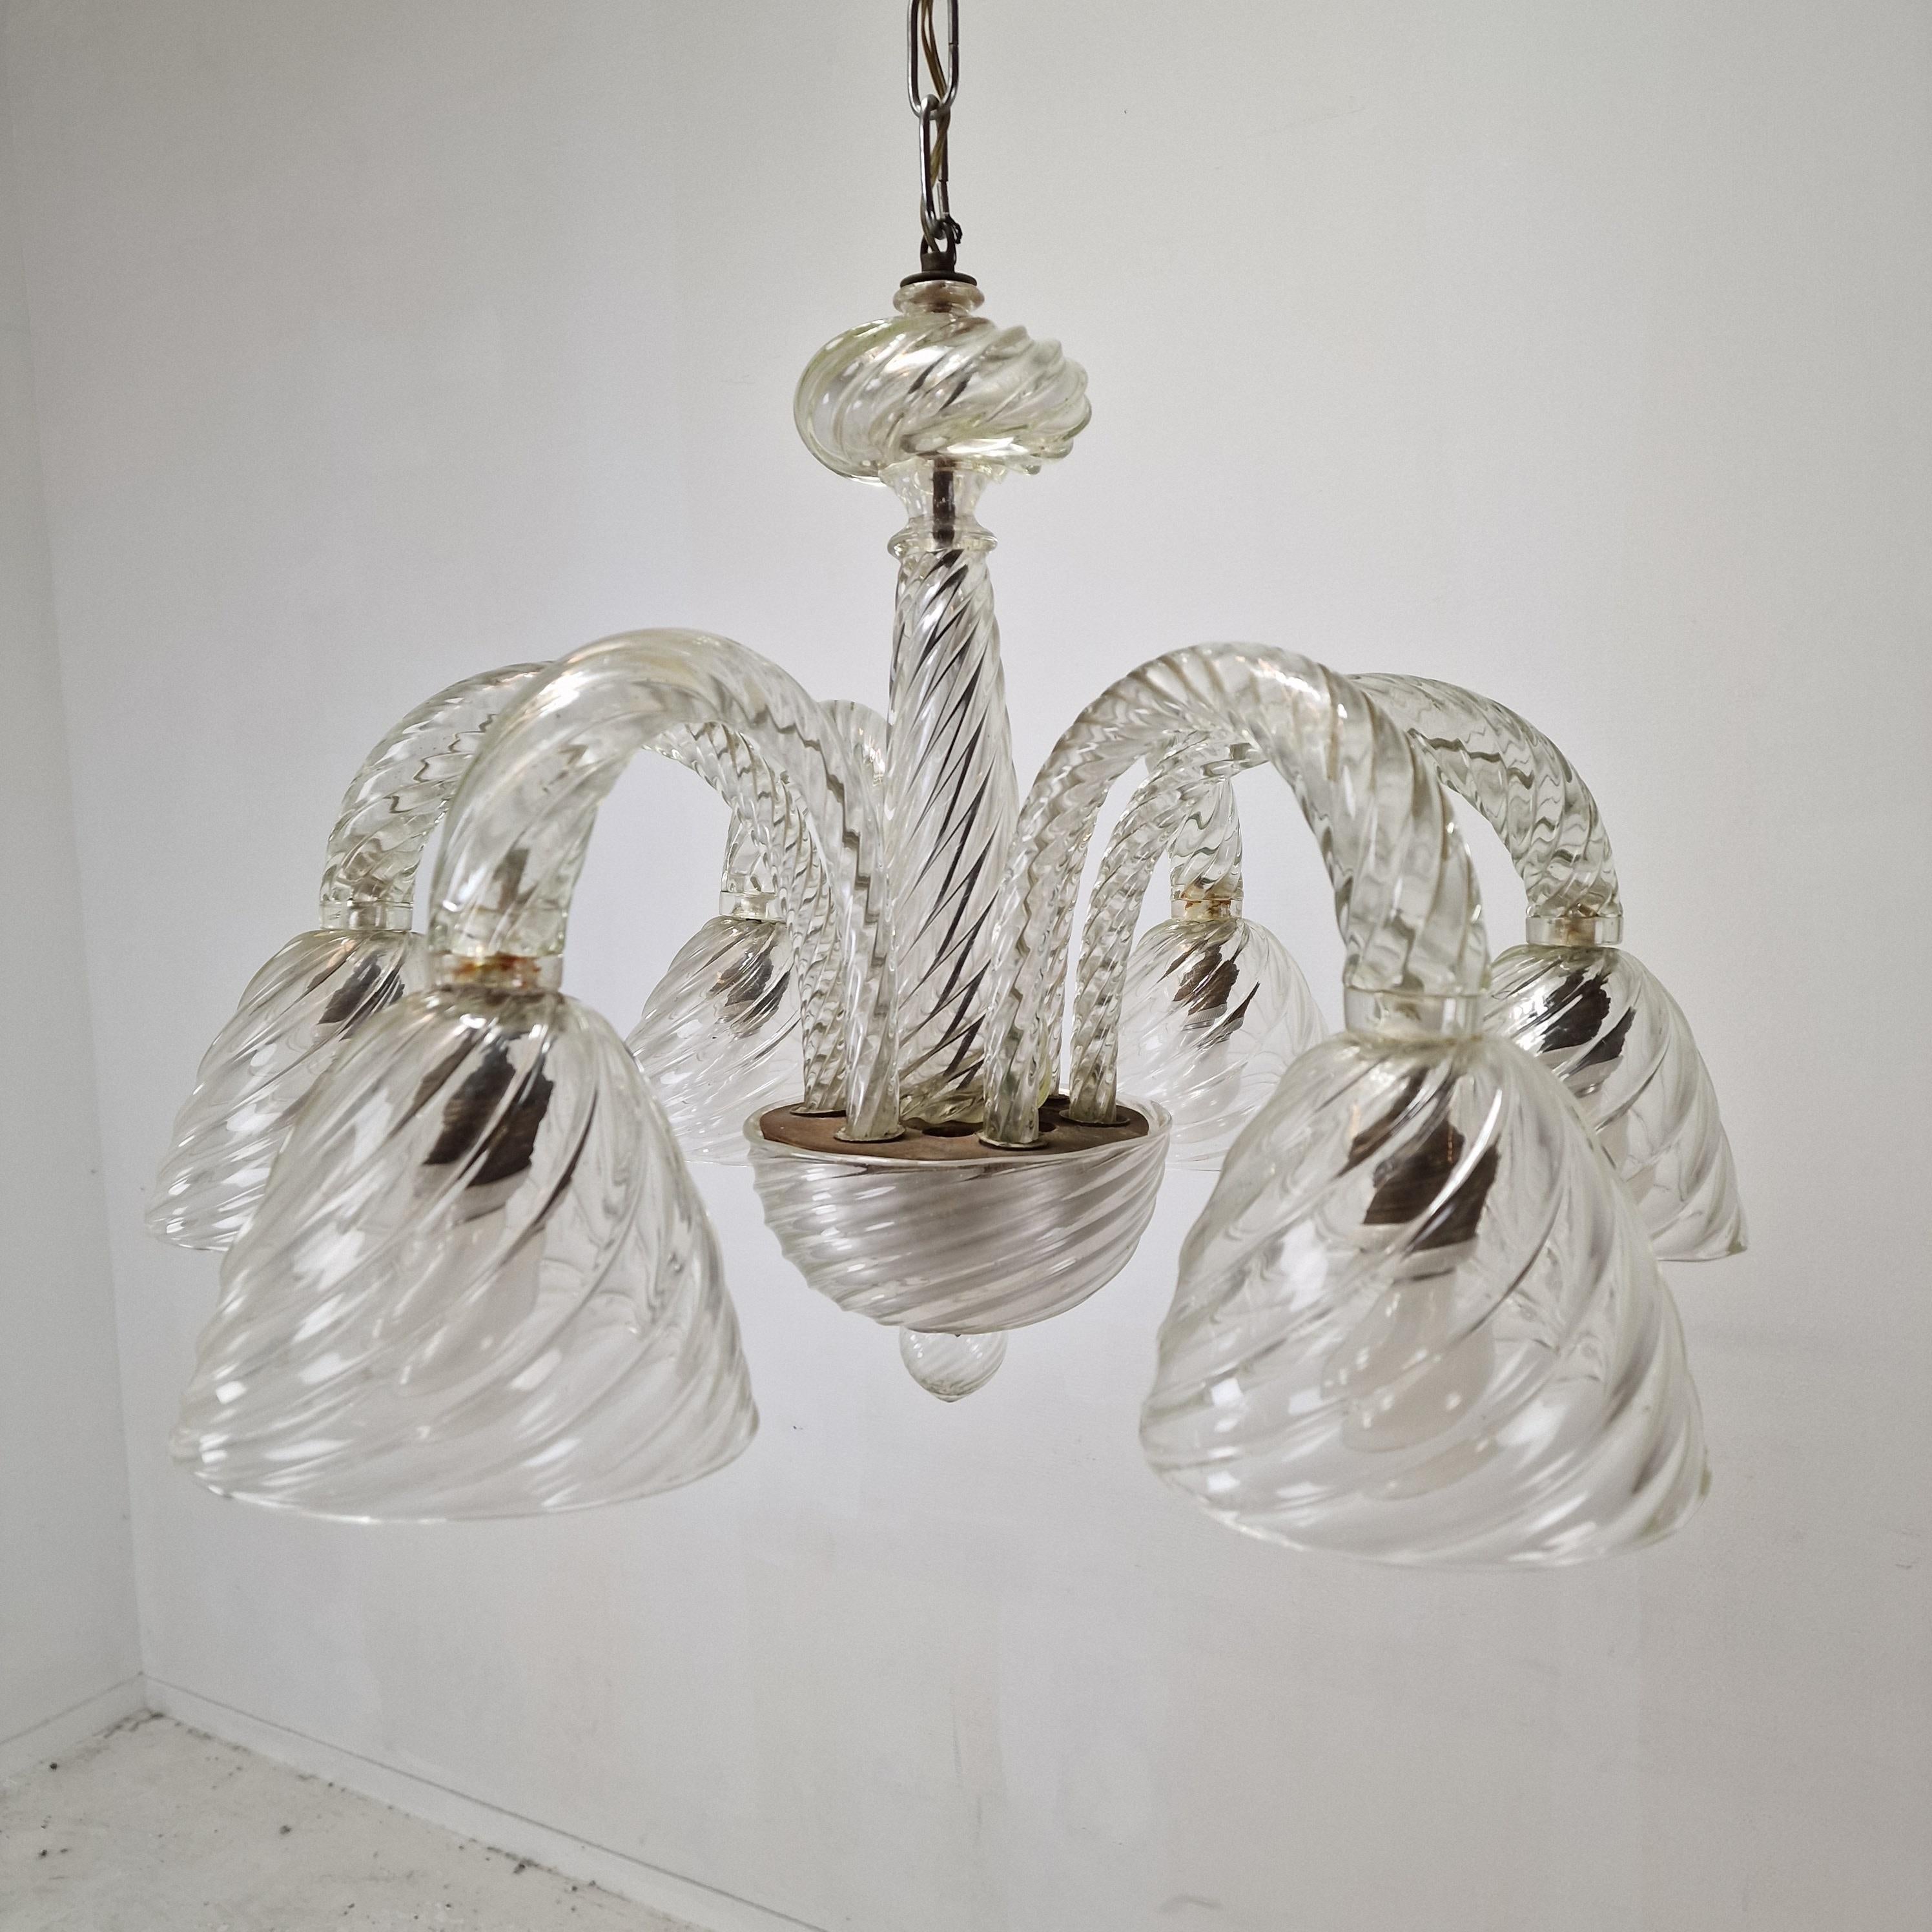 Barovier & Toso Murano Glass Chandelier, Italy 1950's For Sale 8